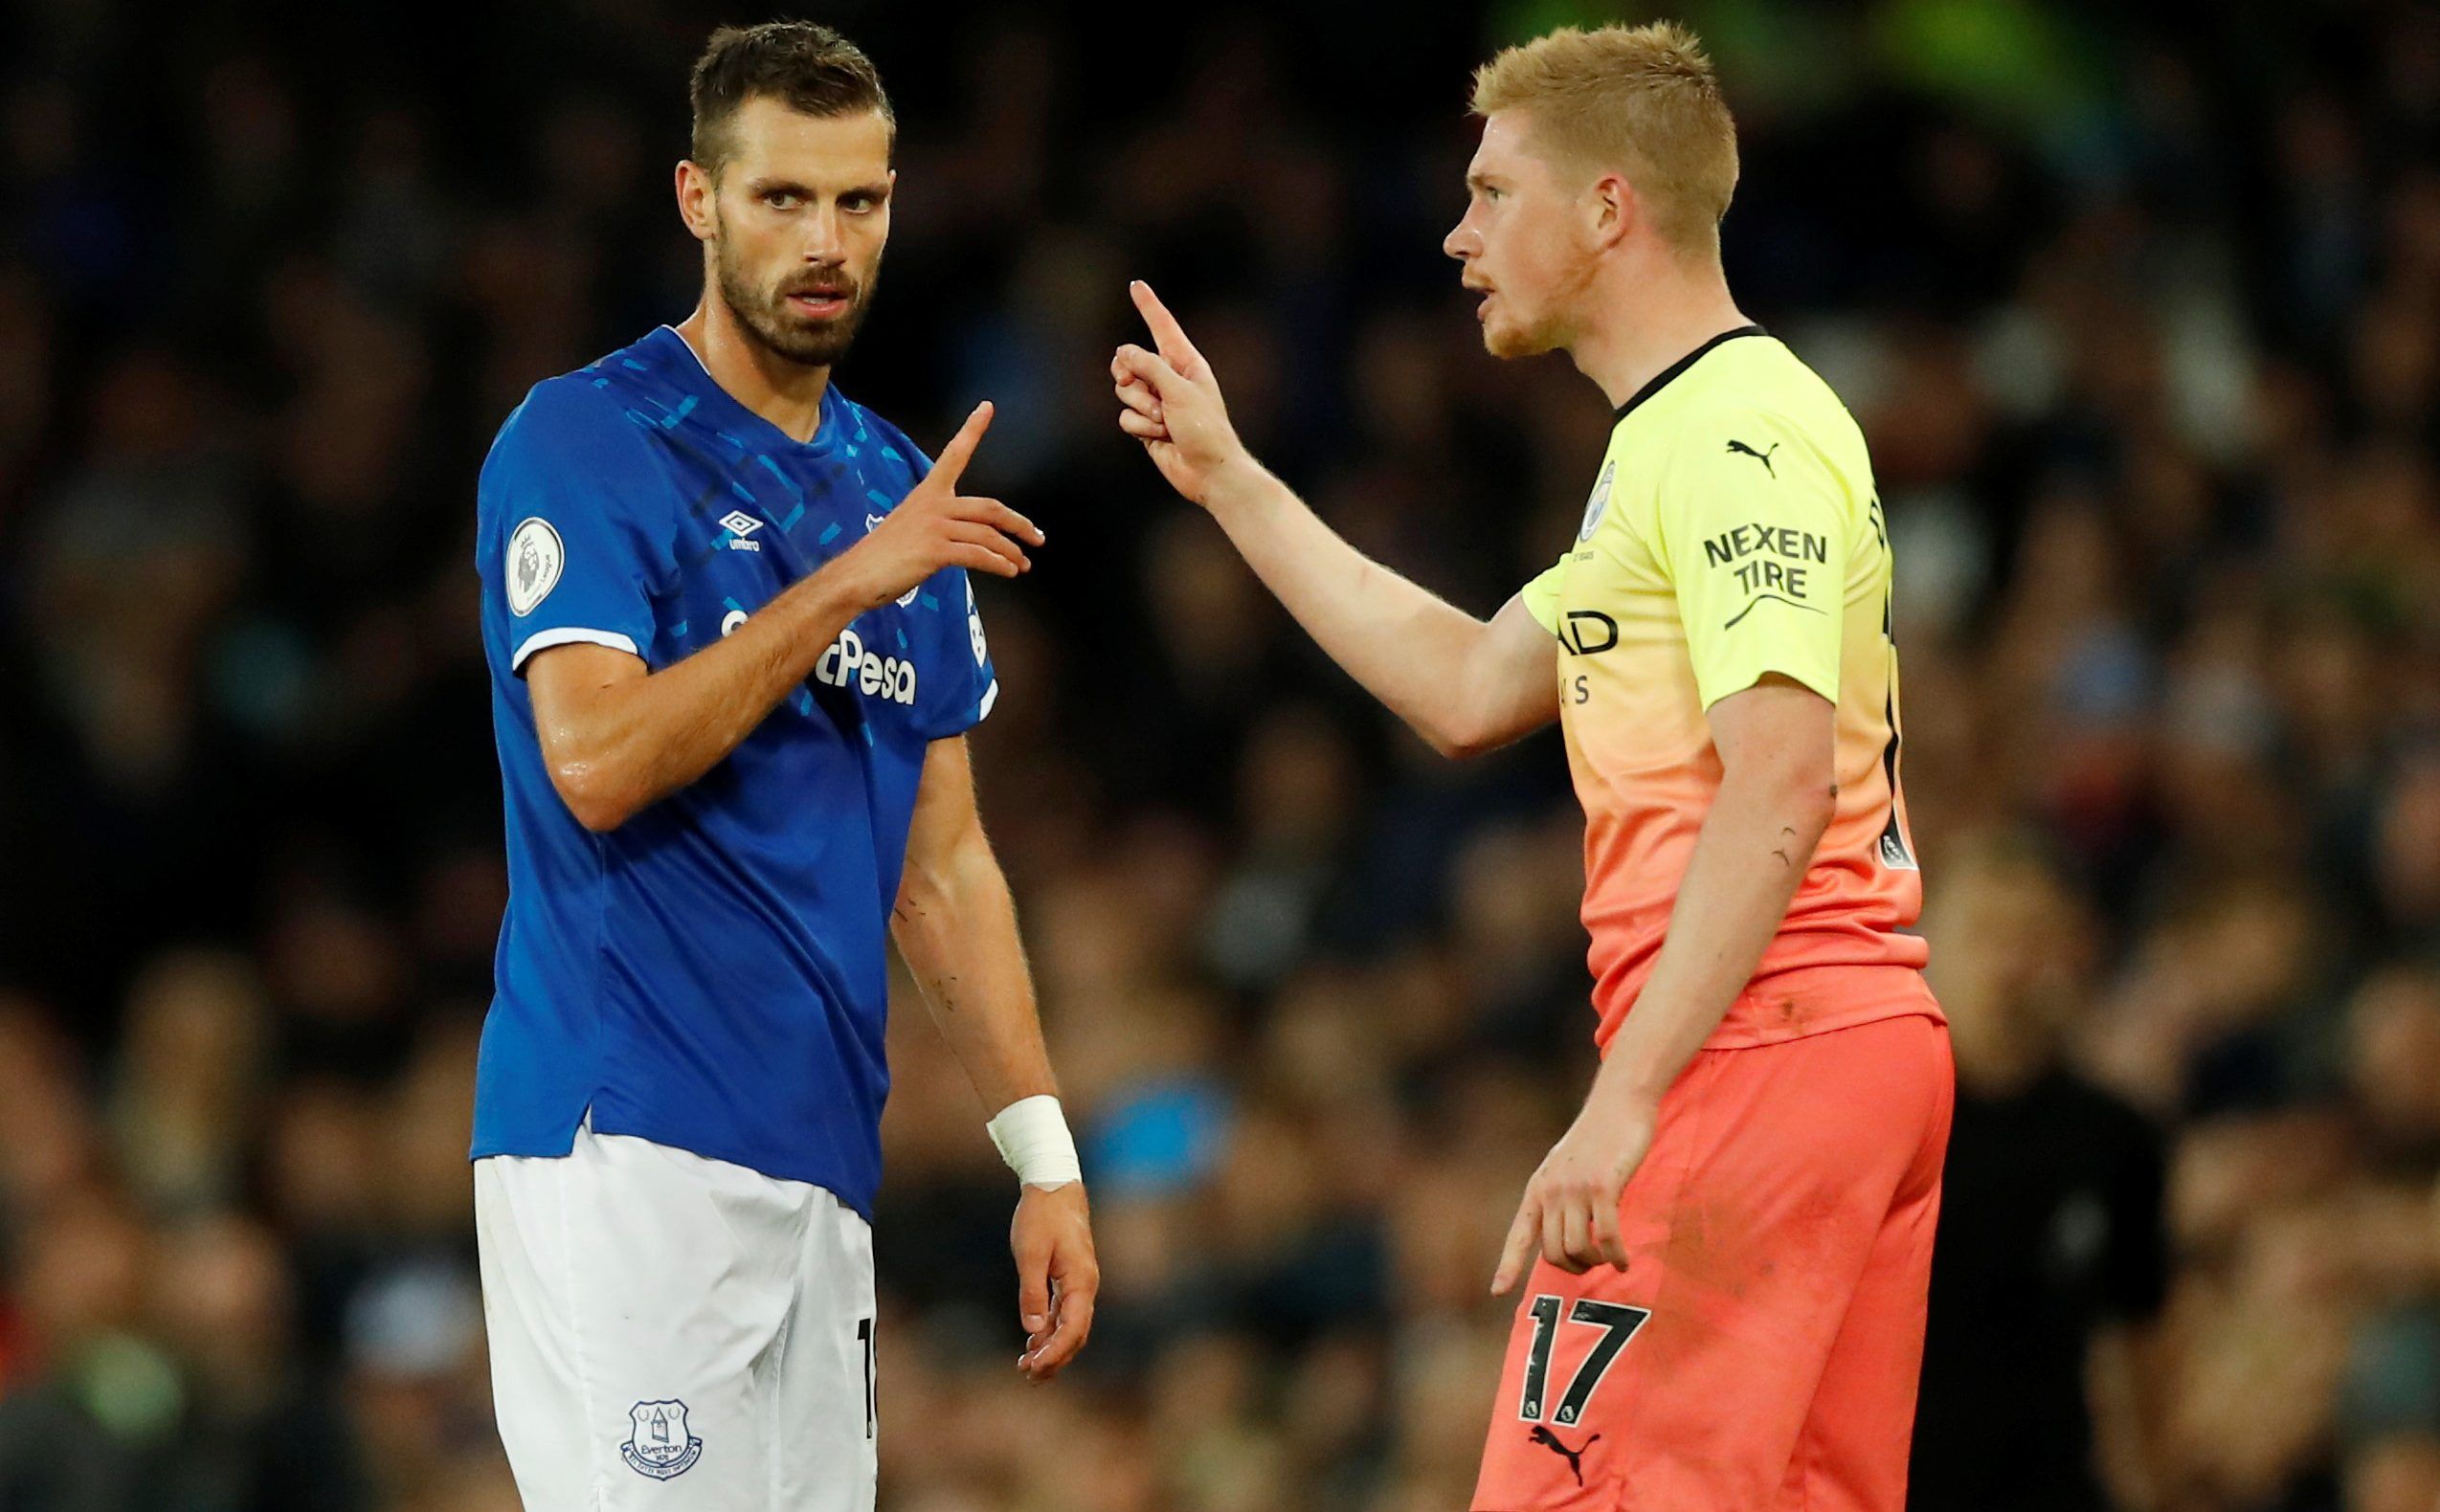 Soccer Football - Premier League - Everton v Manchester City - Goodison Park, Liverpool, Britain - September 28, 2019  Manchester City's Kevin De Bruyne clashes with Everton's Morgan Schneiderlin    Action Images via Reuters/Andrew Boyers  EDITORIAL USE ONLY. No use with unauthorized audio, video, data, fixture lists, club/league logos or 